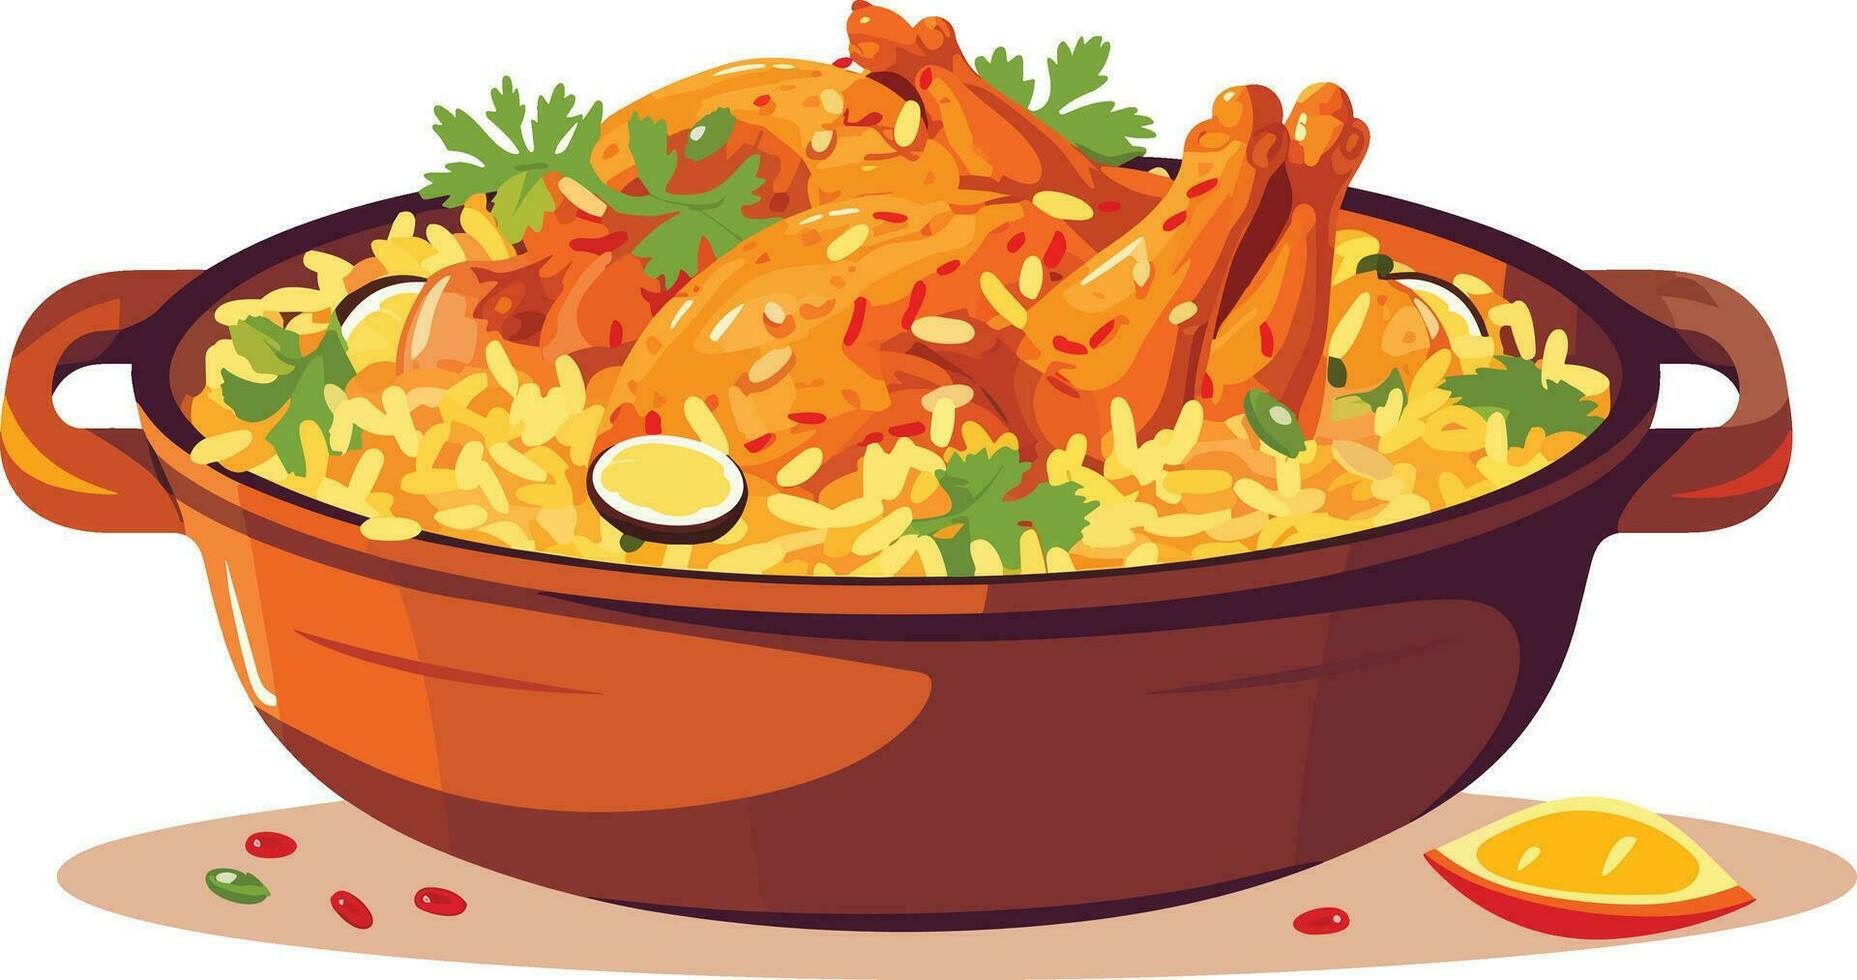 hot and spicy chicken biryani with roasted pieces and lemon illustration on isolated white background vector